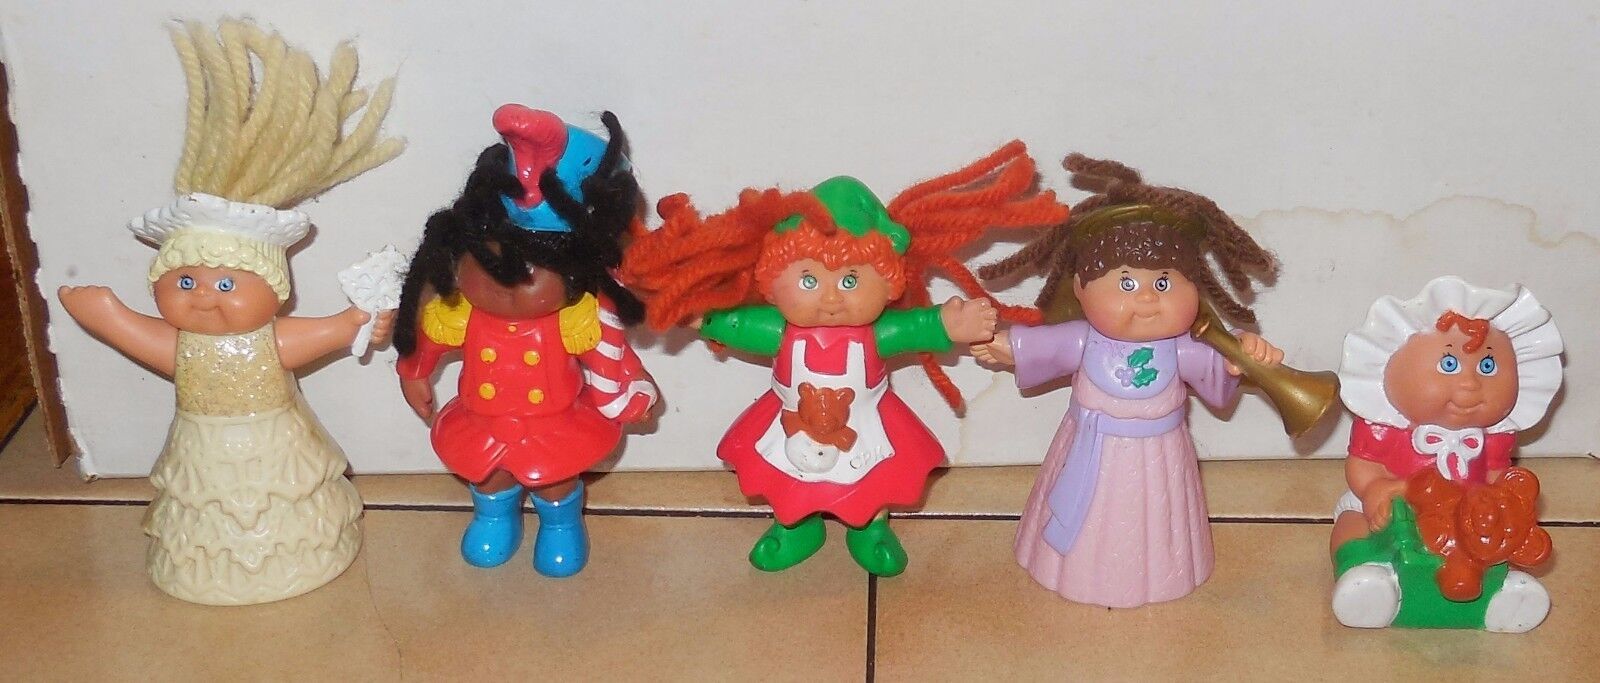 Primary image for 1994 McDonalds Happy Meal Toy Cabbage Patch Kids Complete Set of 4 Plus Under 3